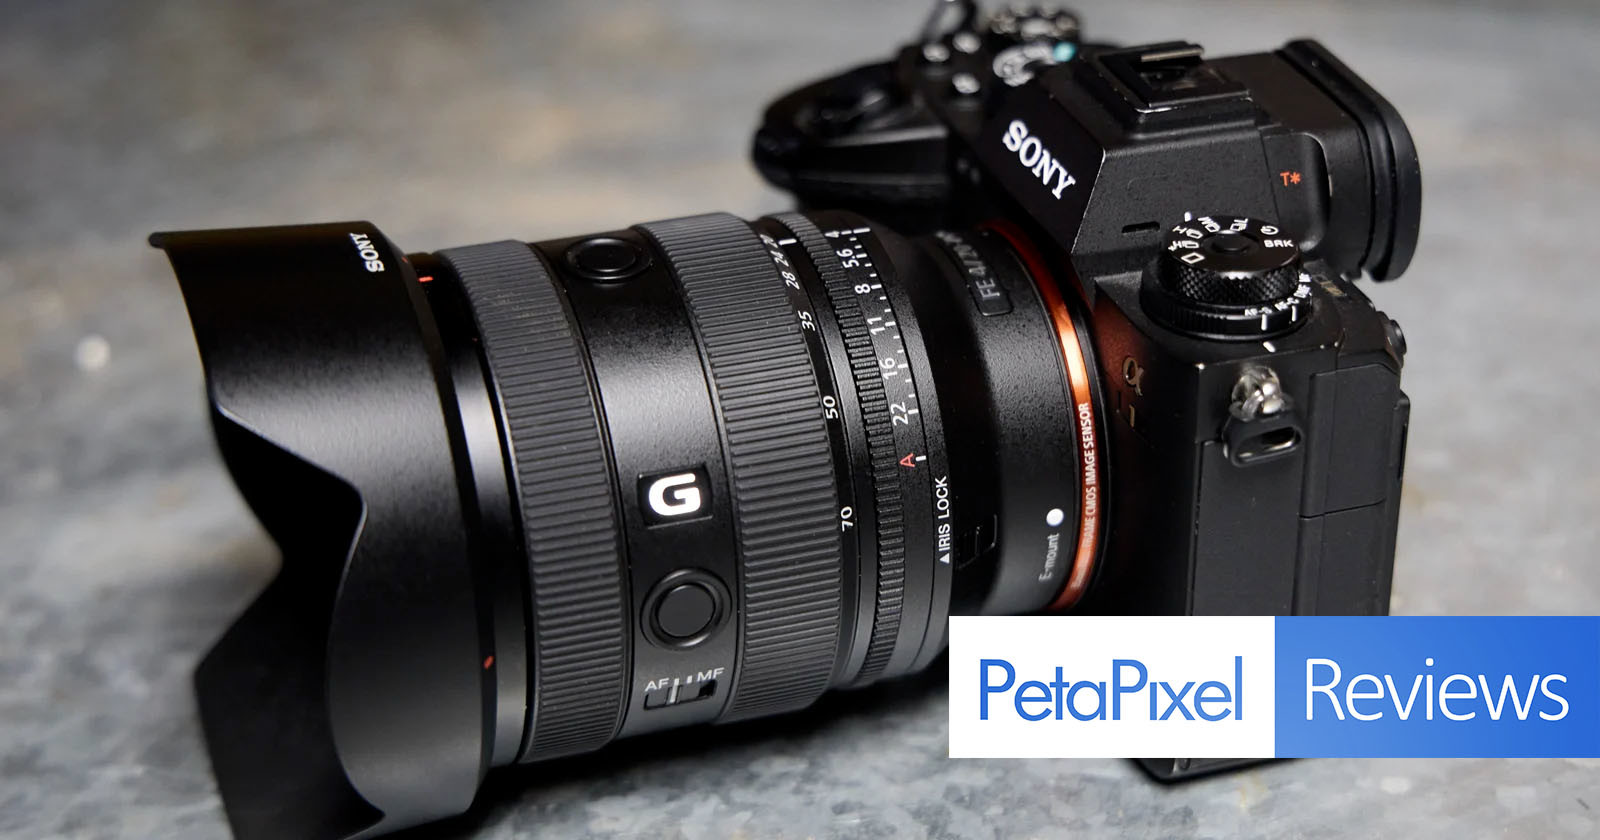 Sony 20-70mm f/4 G Review: A Mostly Excellent Zoom Lens